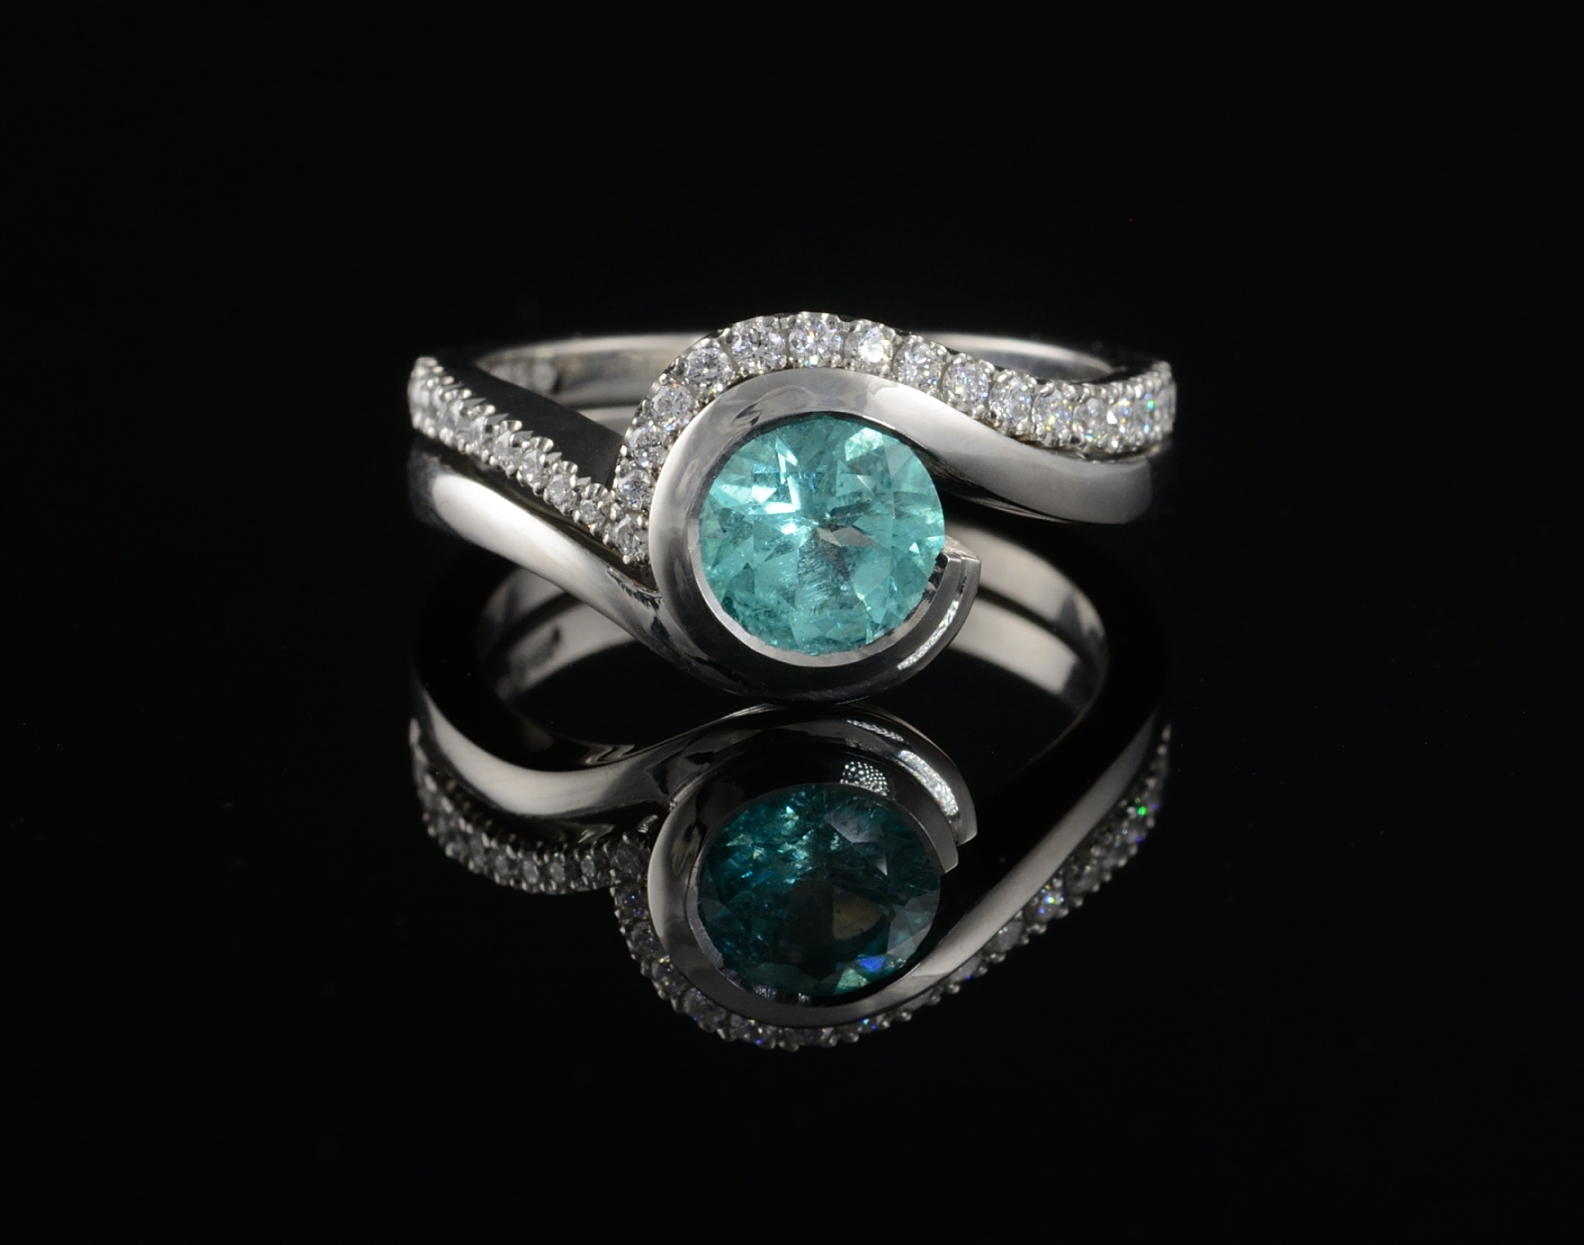 Buy Latest Una colour stone Ring For Women From Kisna.